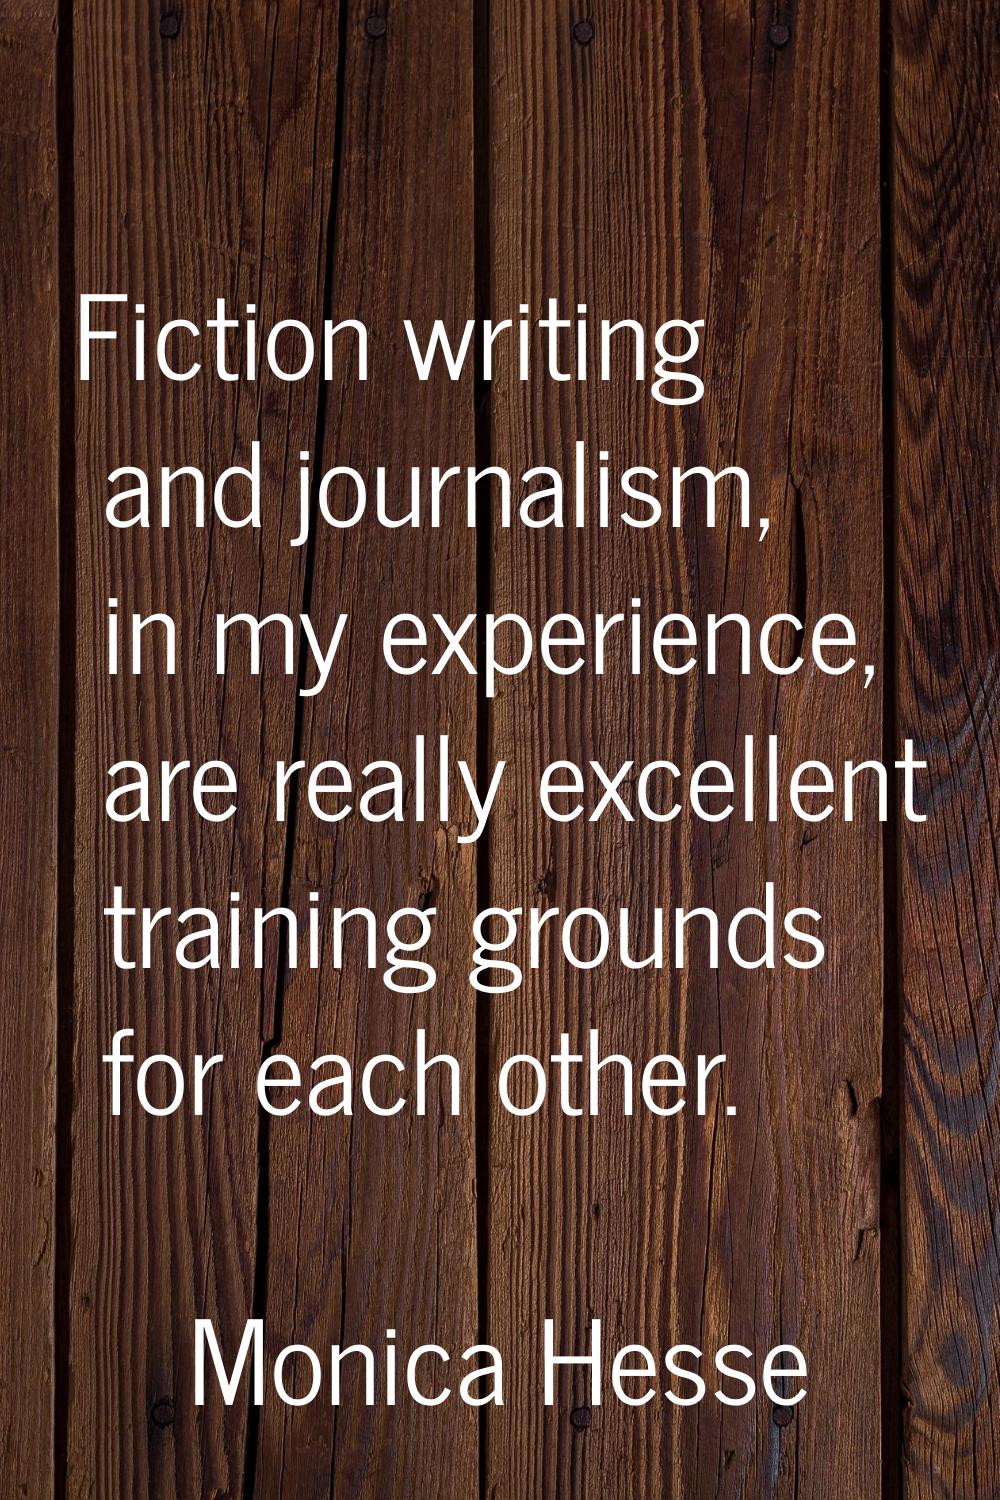 Fiction writing and journalism, in my experience, are really excellent training grounds for each ot